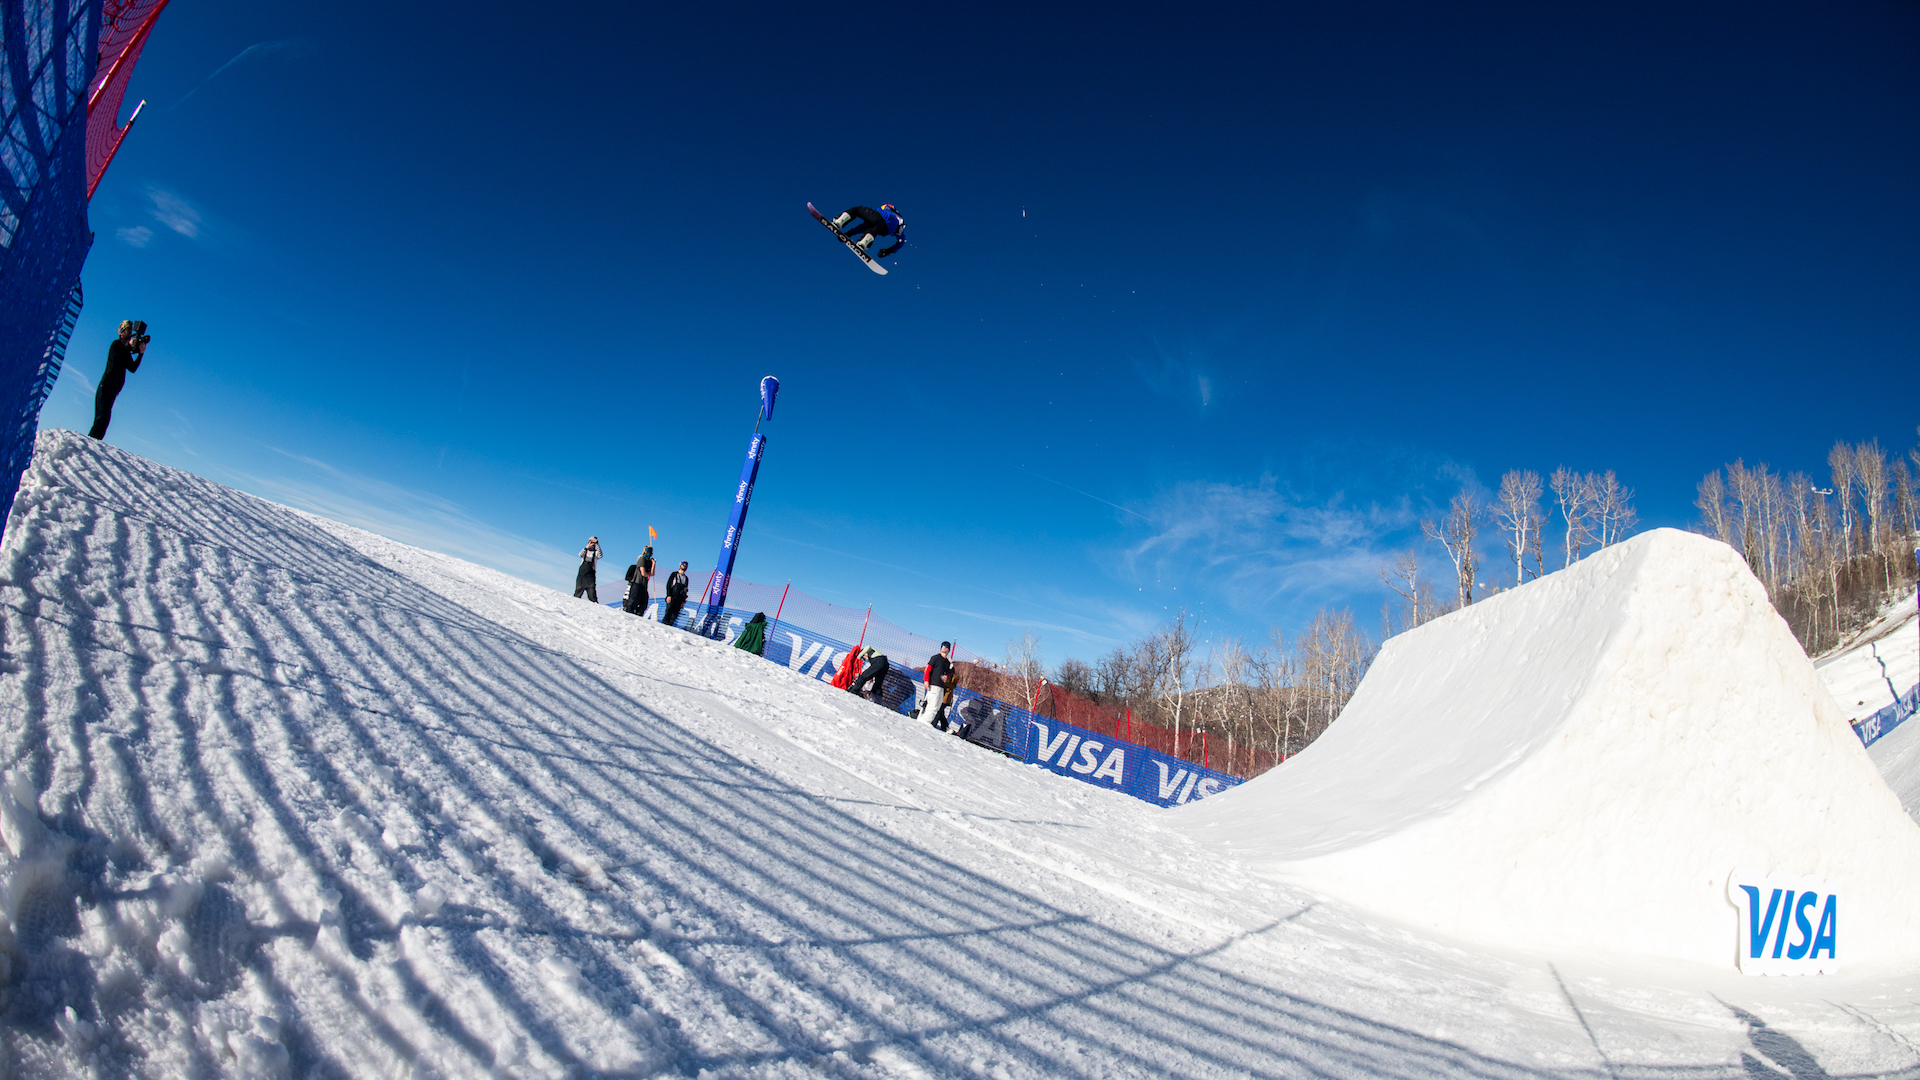 Hailey Langland jumps in Big Air.